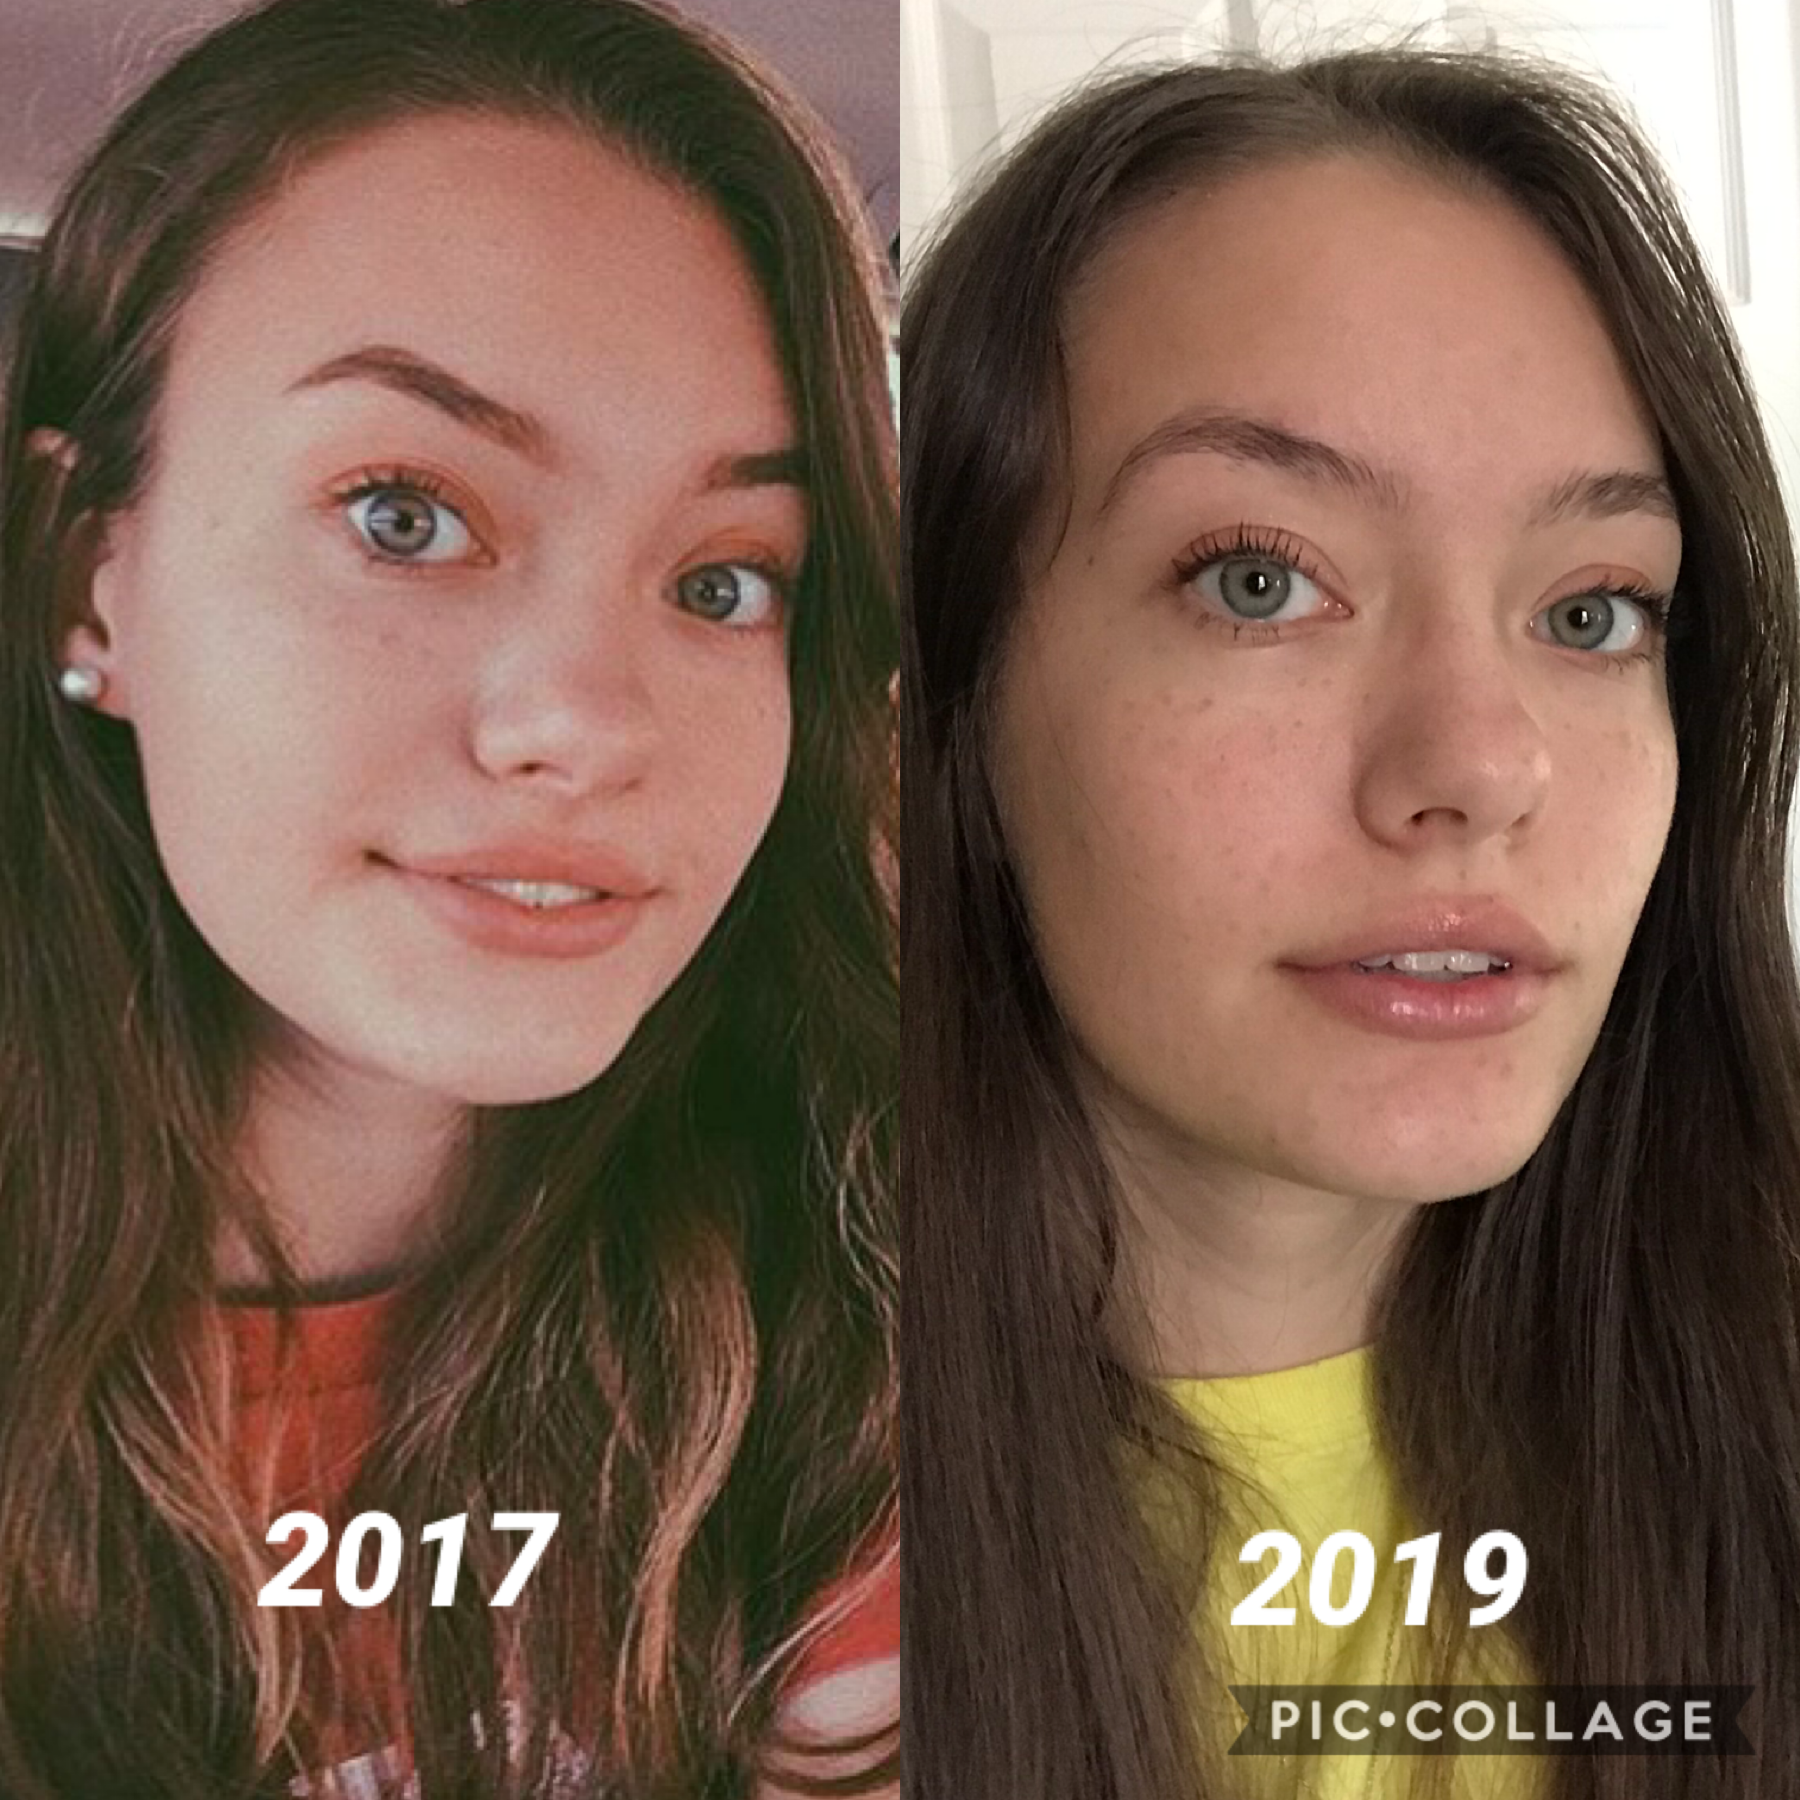 tw?
has she glowed up 🤭 (minus the fact that i don’t fill in my eyebrows anymore lol) also i can’t tell if my now pic is bc i’ve lost weight or gained bone structure 😂 rn i weigh the lightest i’ve been since freshman year oof. the first pic is from sophom